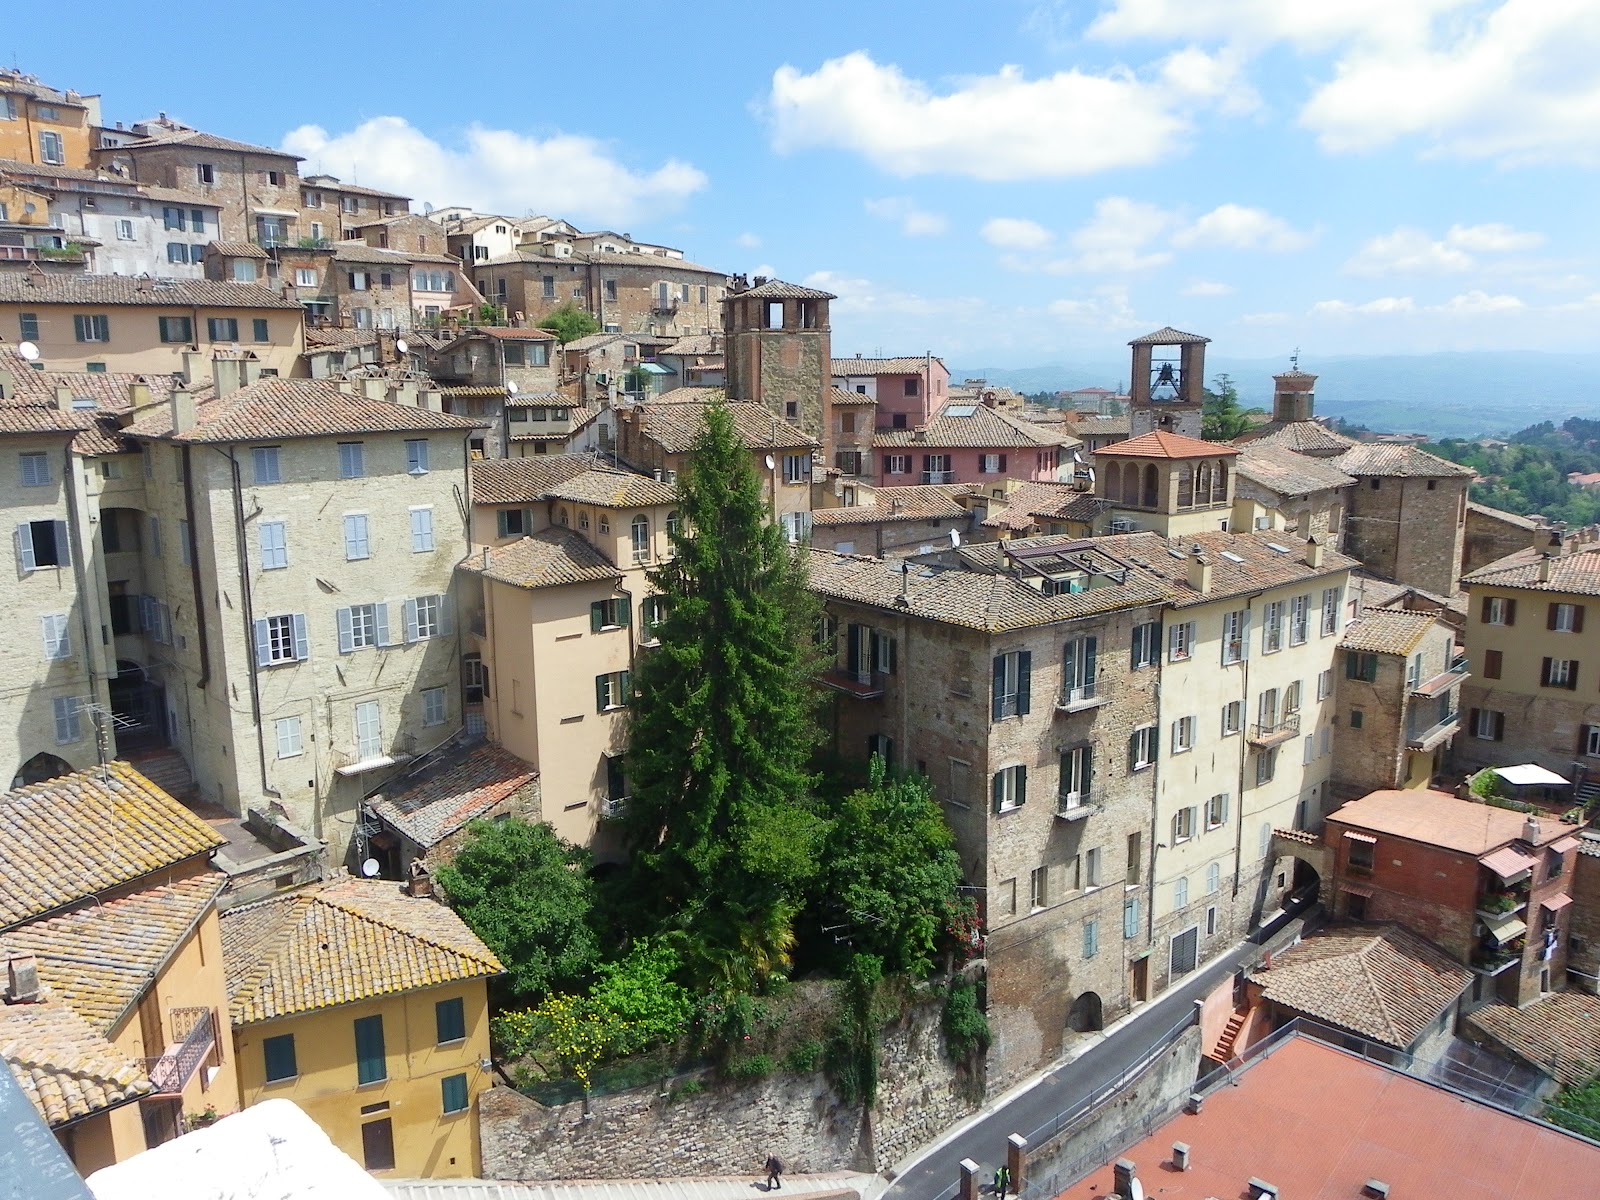 Travels with Gail and Rob: More Perugia photos